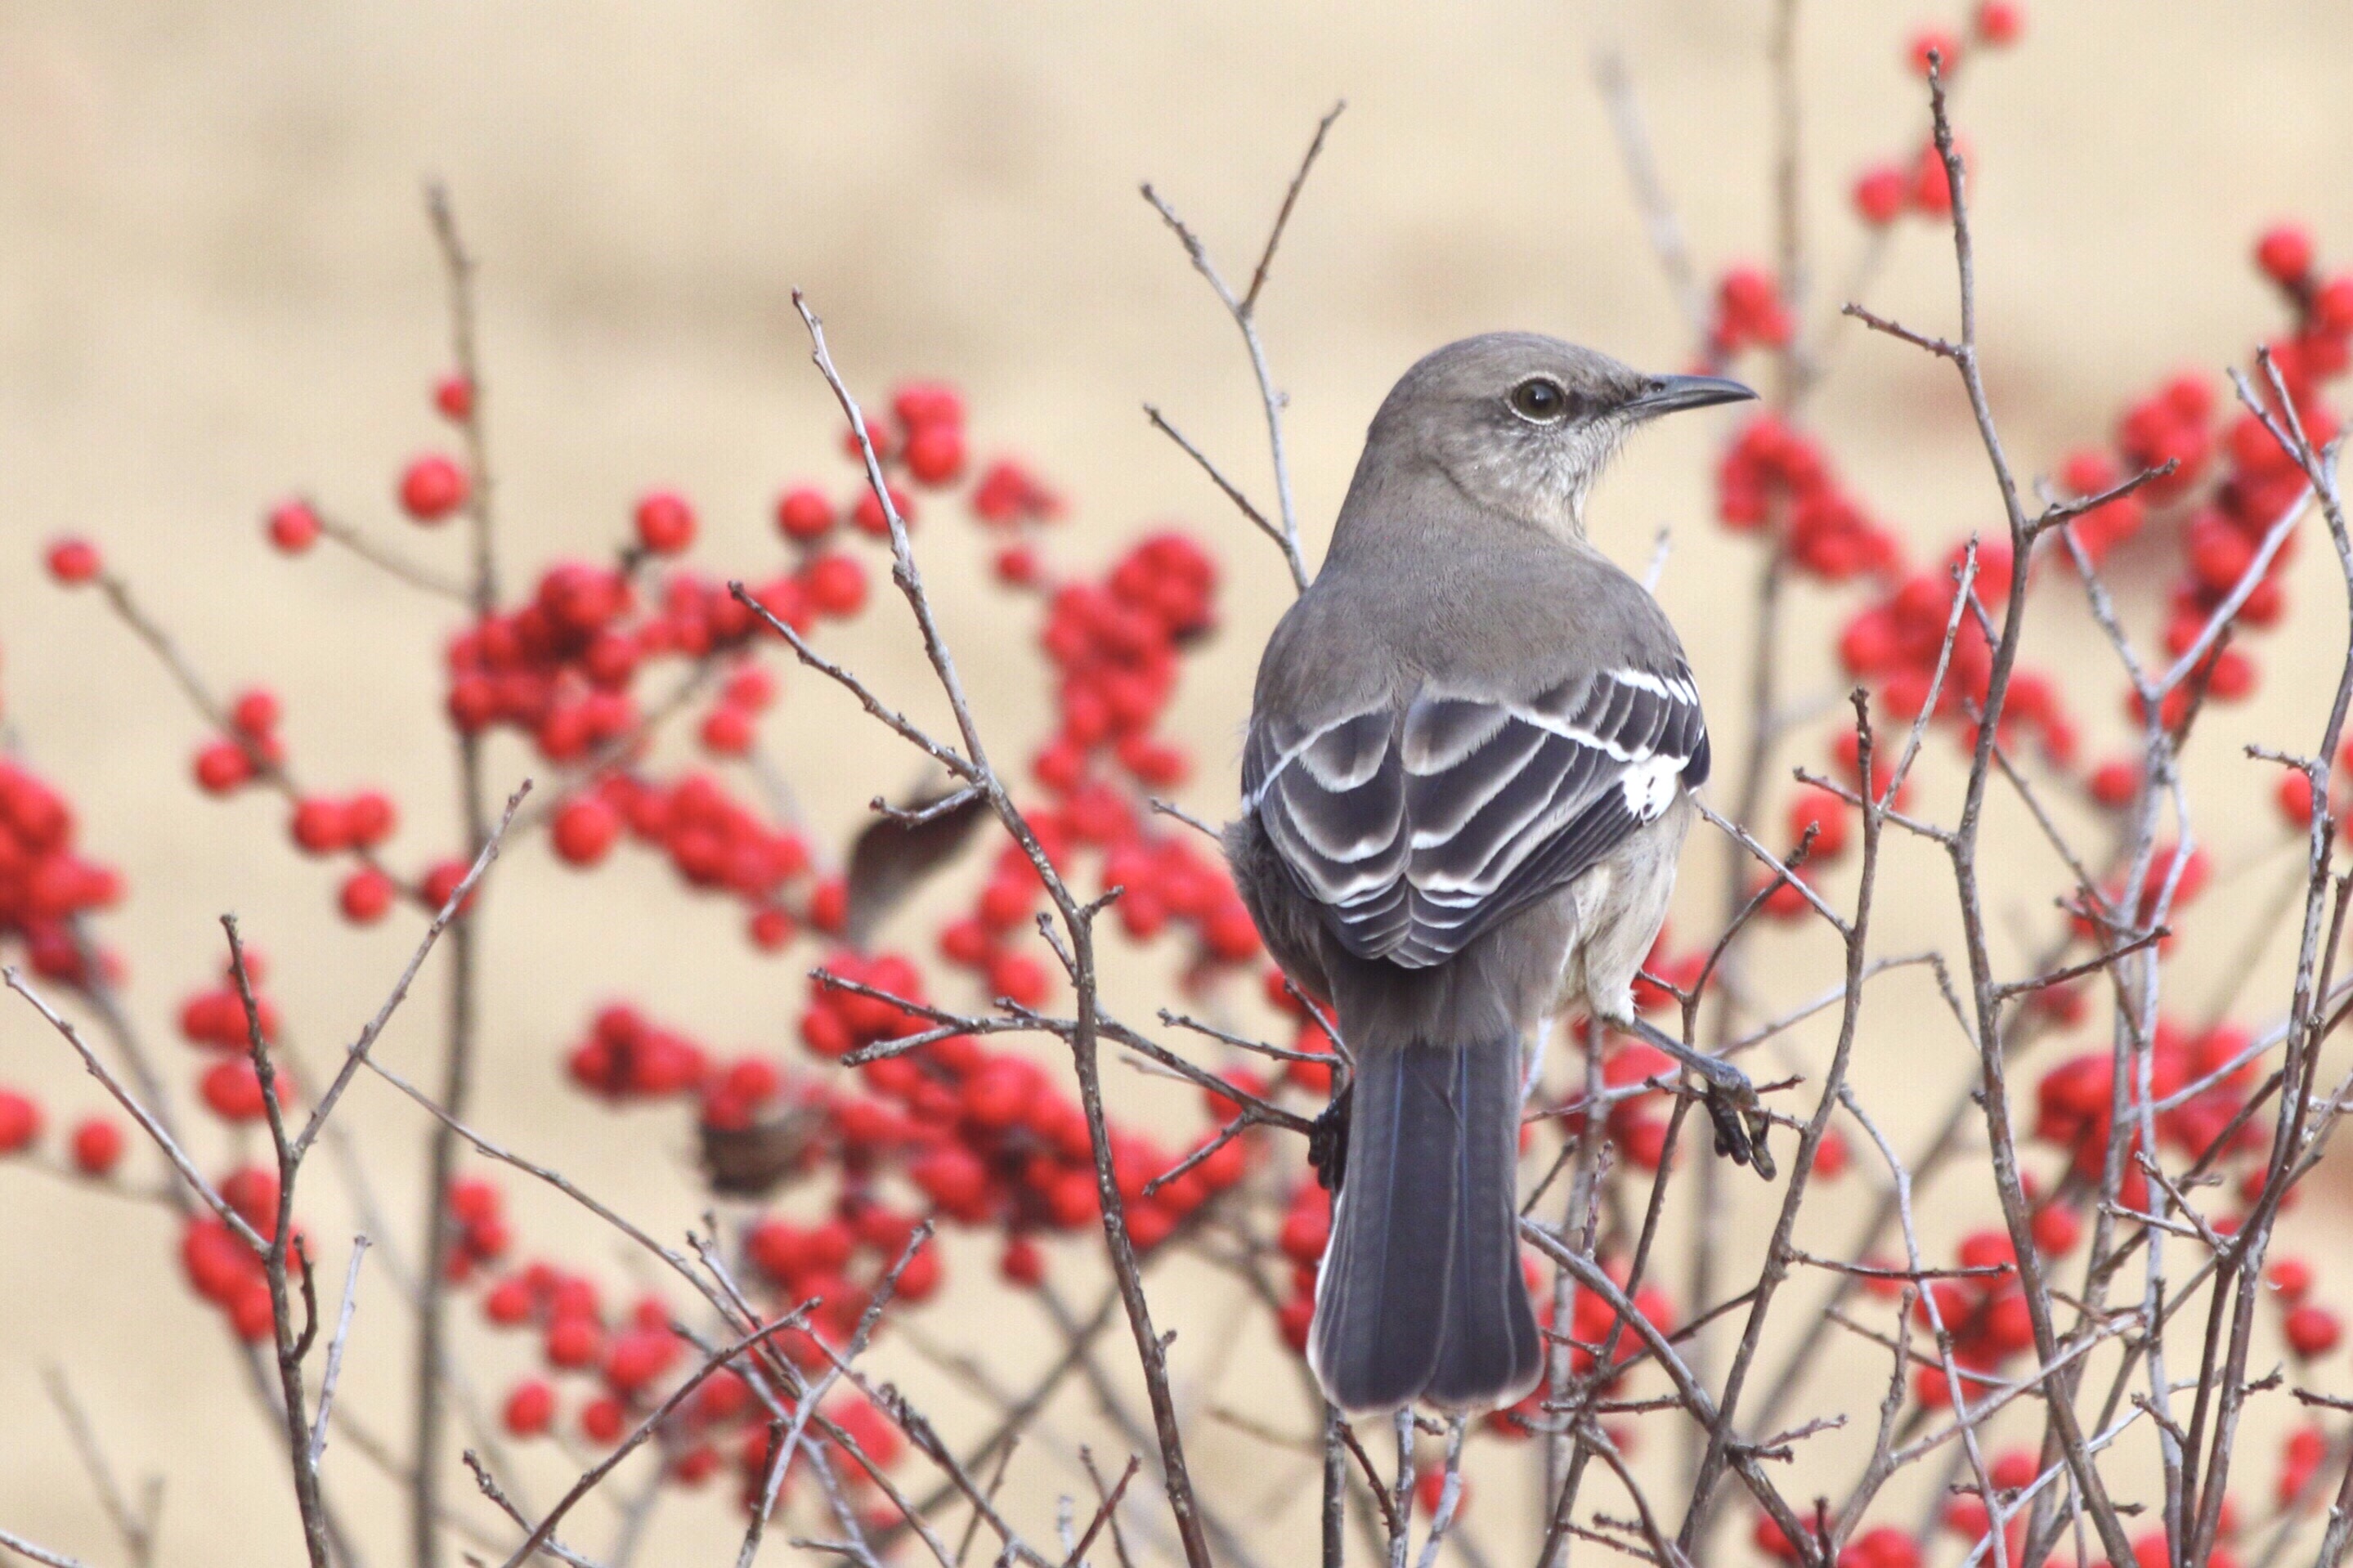 bird with red berries -Mockingbird spotted in EBB water area - photo by Yumiko Sakurai